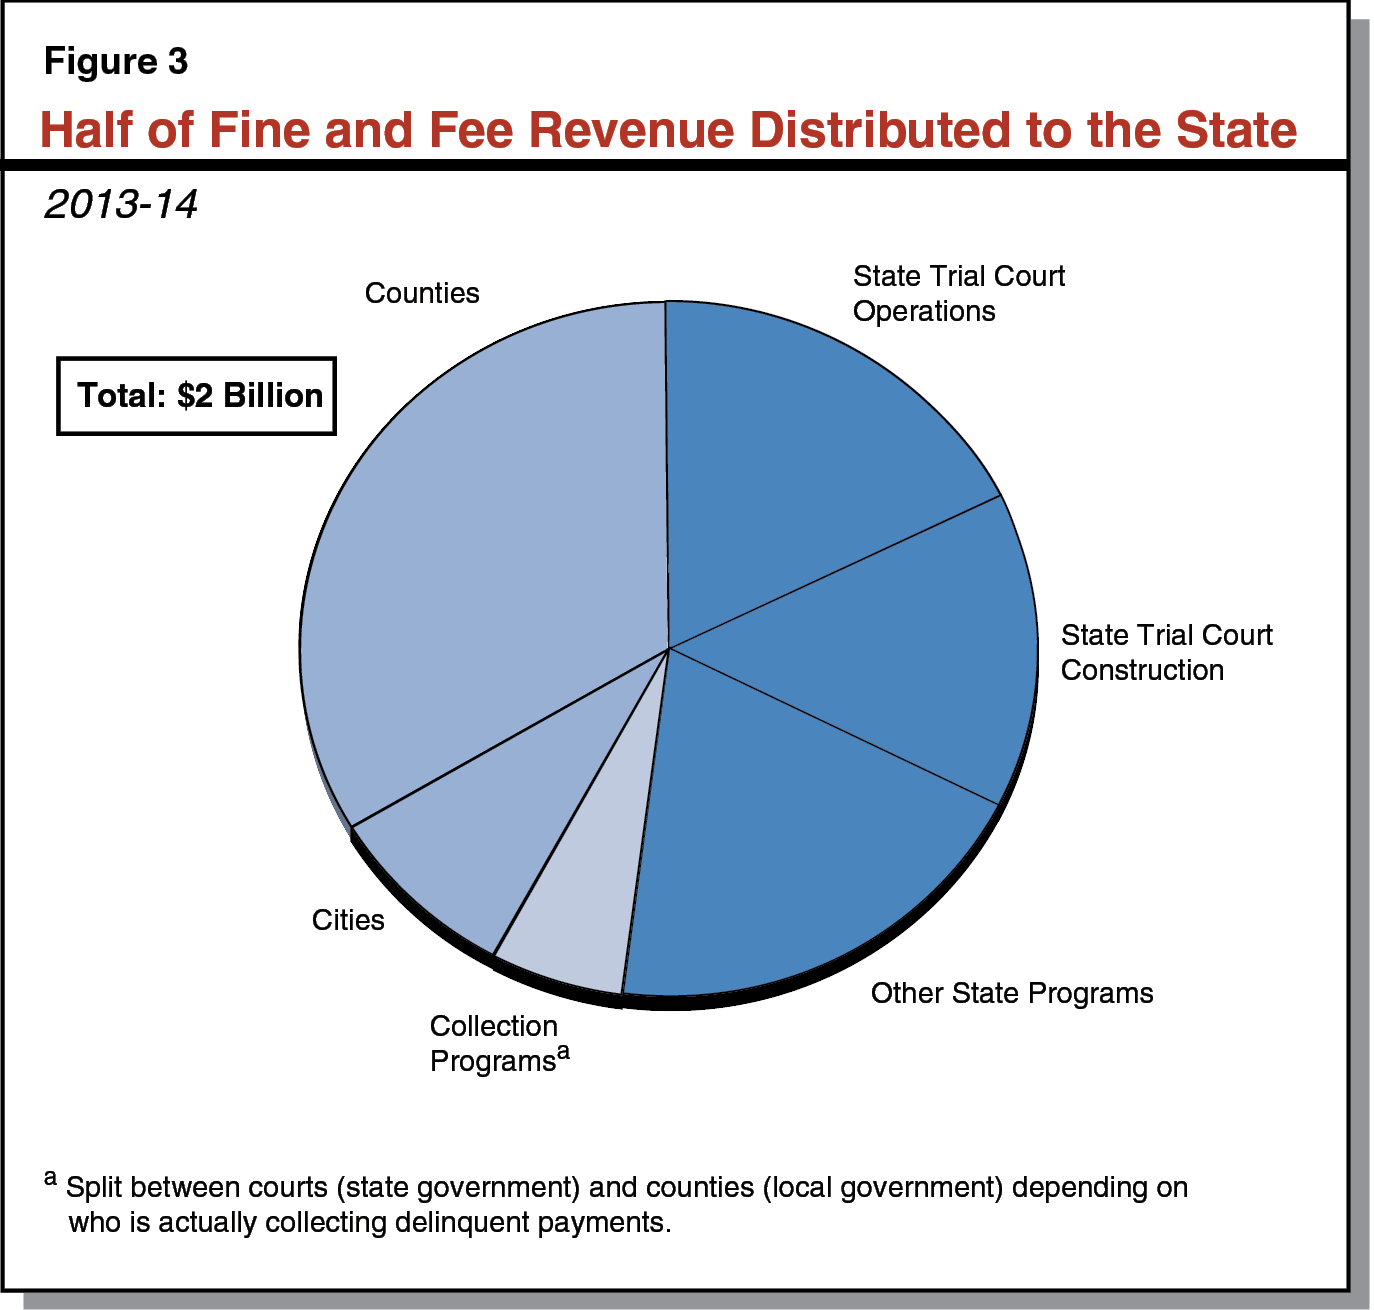 Figure 3 - Half of Fine and Fee Revenue Distributed to the State